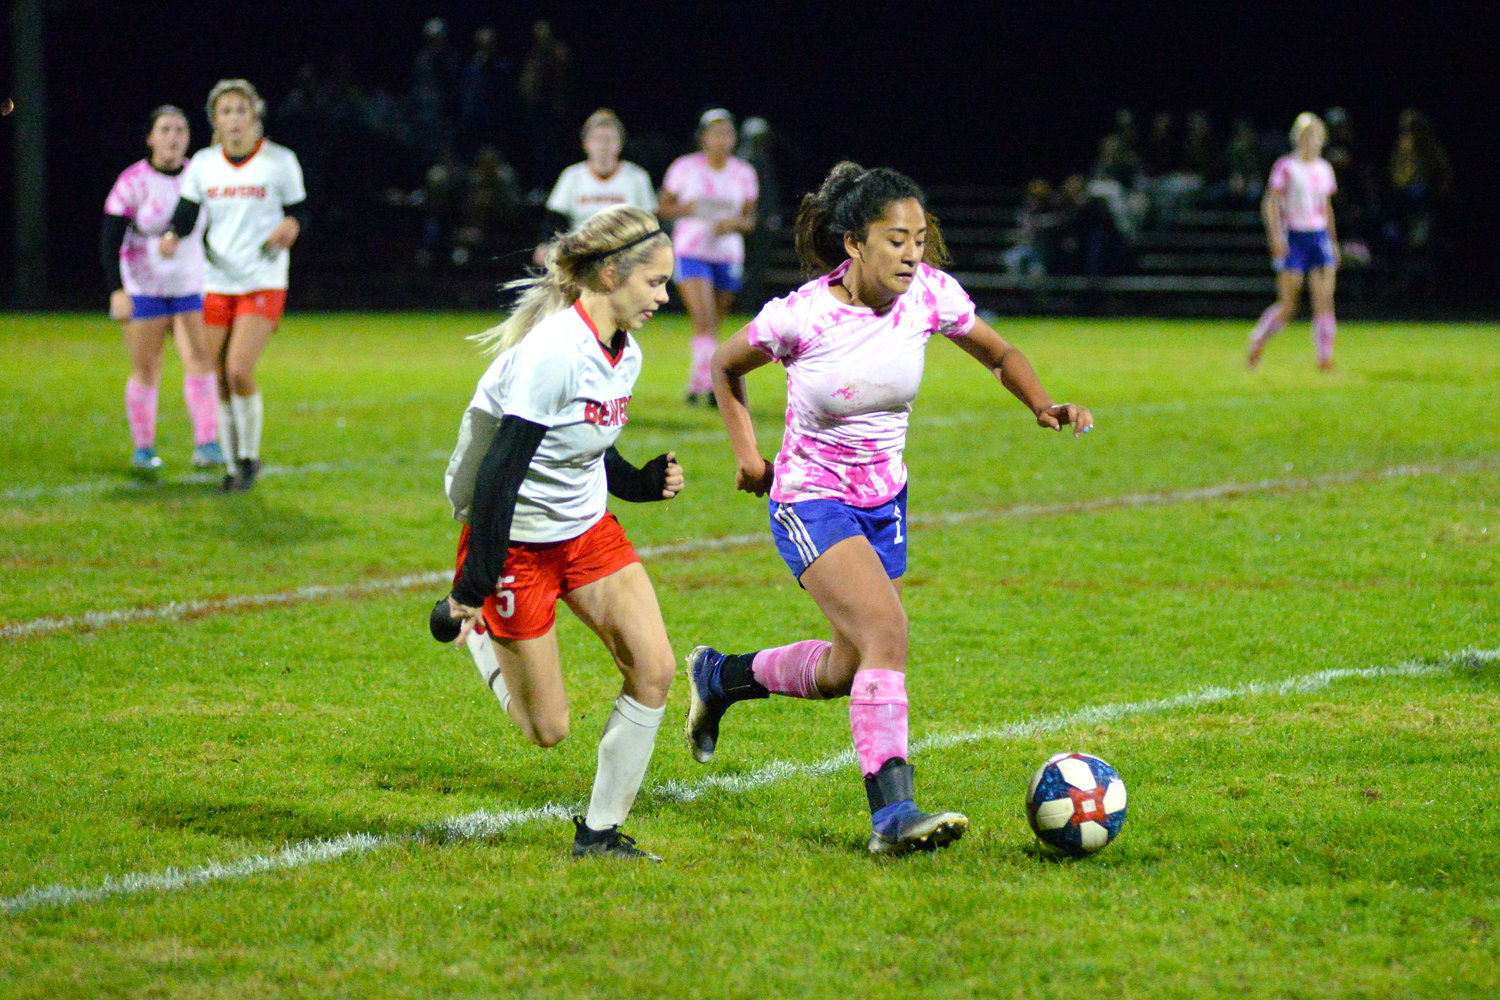 Tenino's Morgan Miner, left, chases down an Elma player on Oct. 19, 2021.